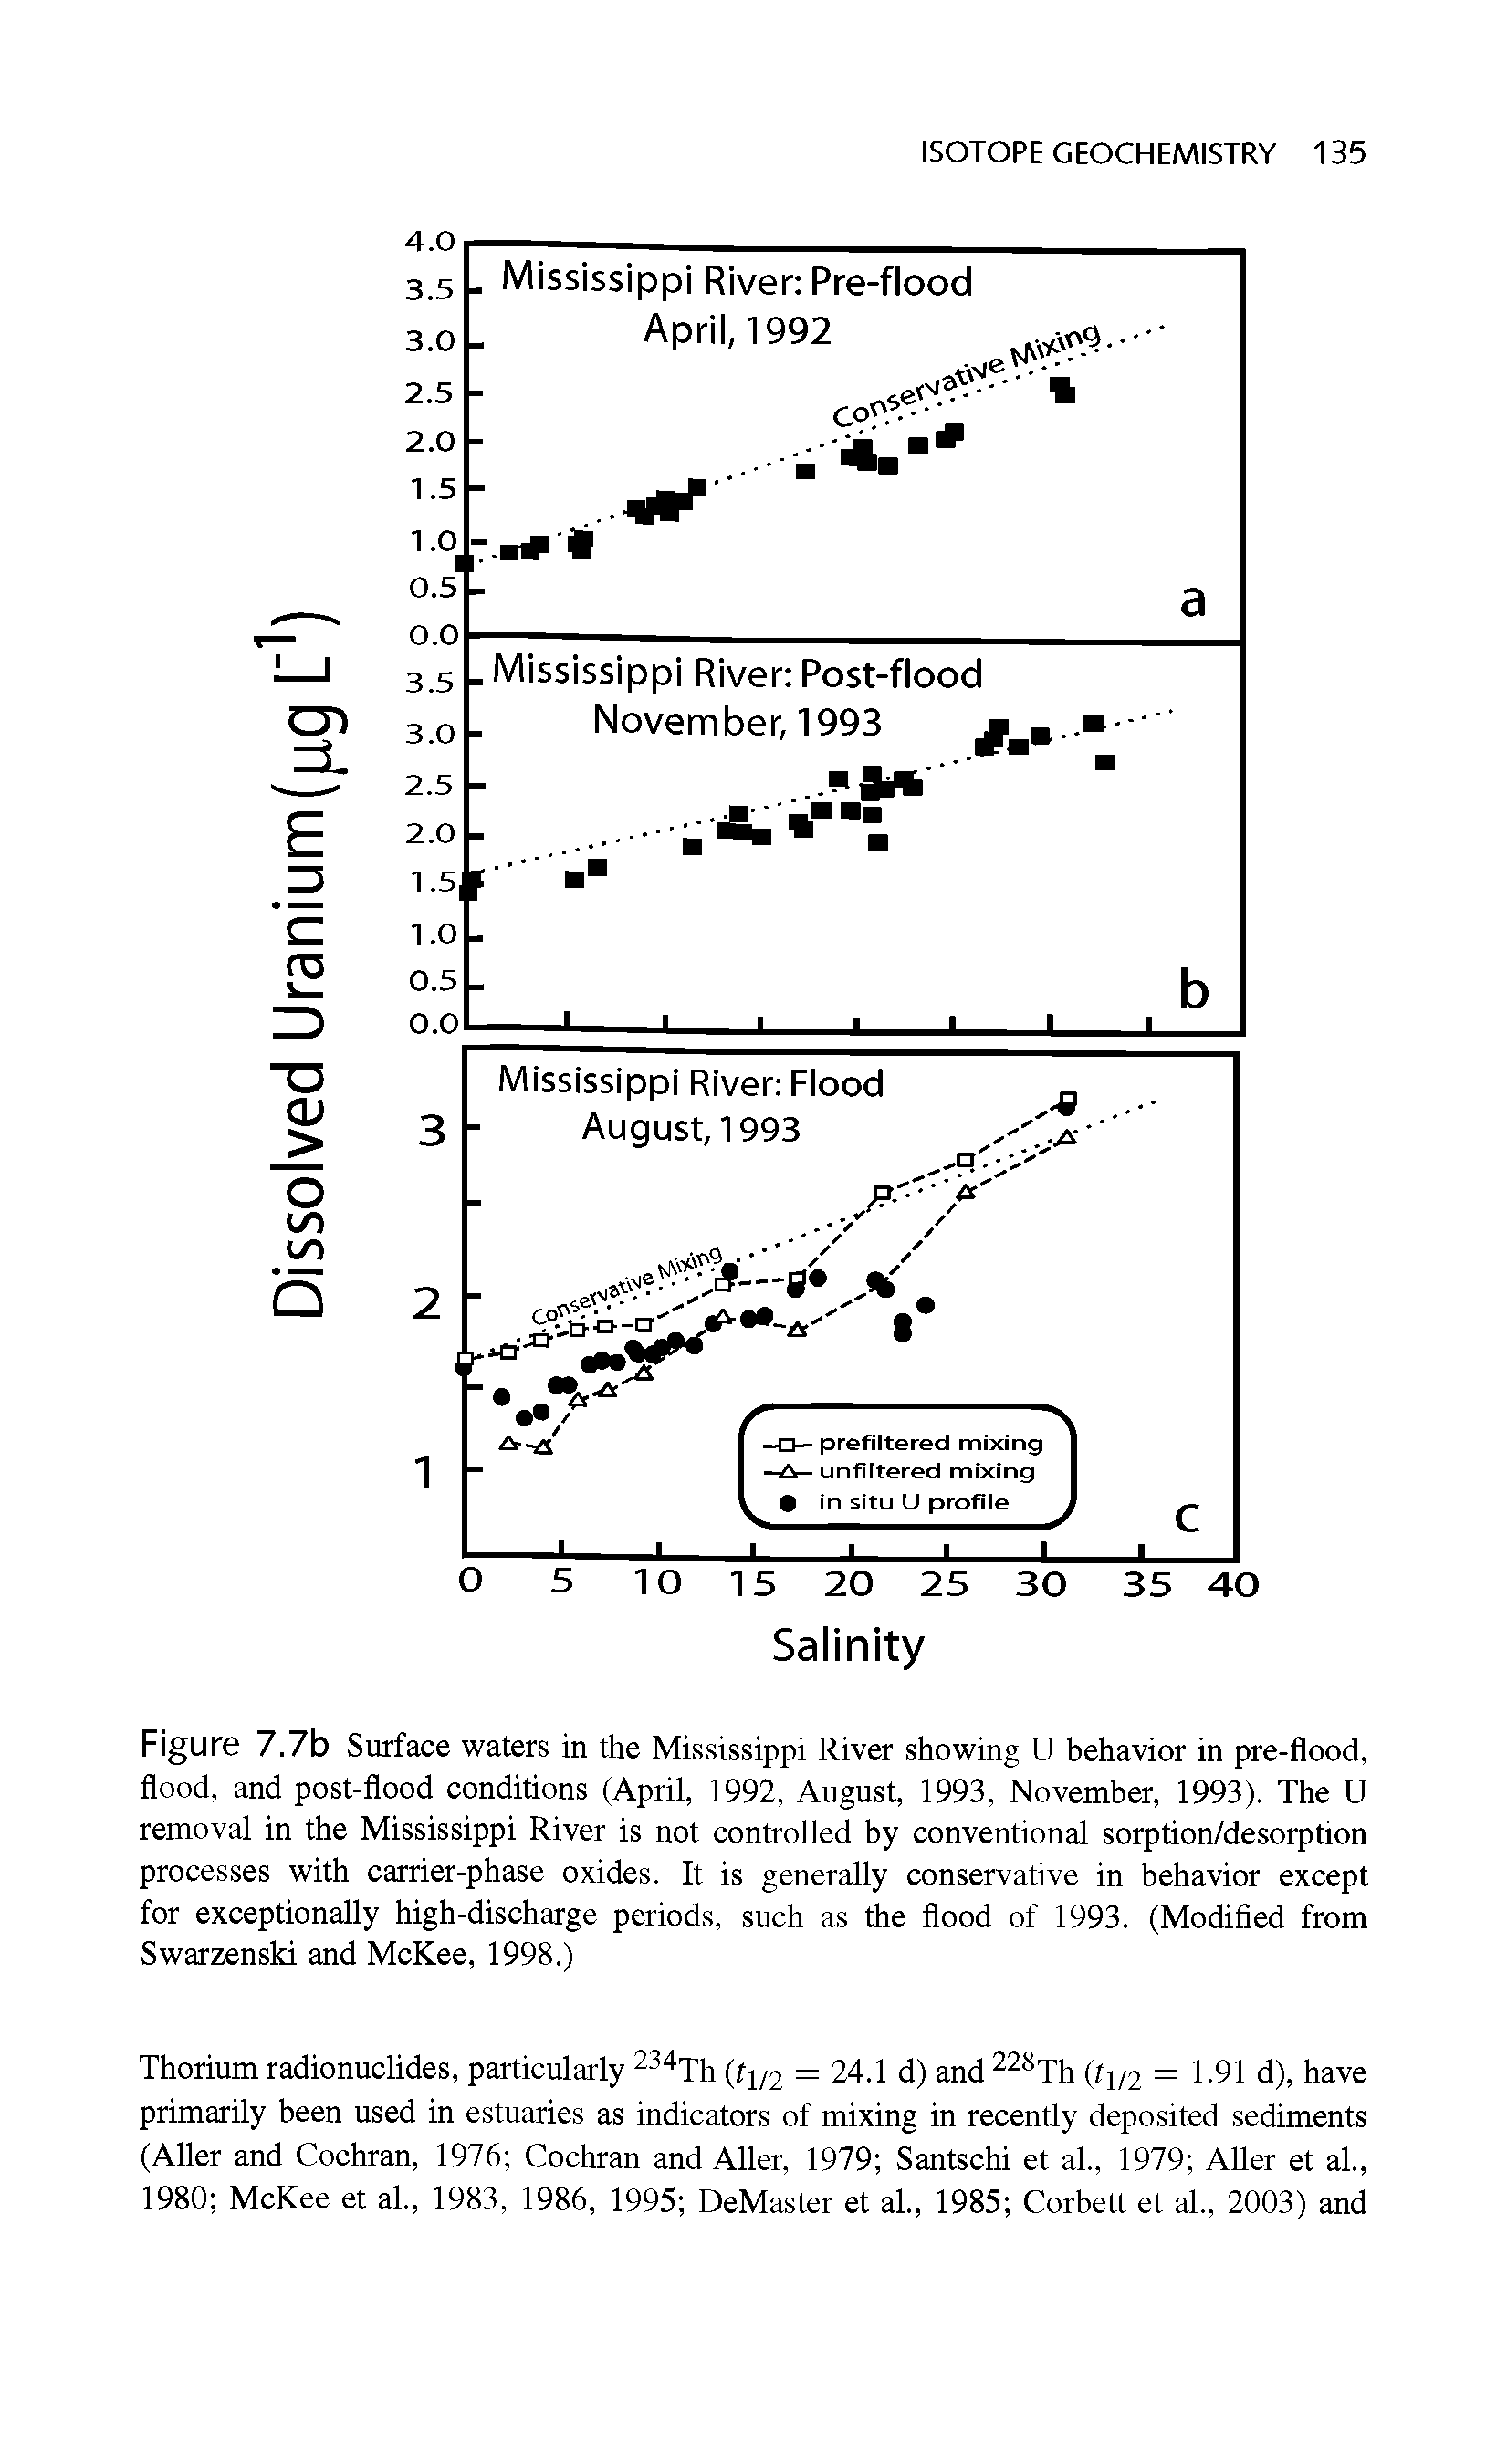 Figure 7.7b Surface waters in the Mississippi River showing U behavior in pre-flood, flood, and post-flood conditions (April, 1992, August, 1993, November, 1993). The U removal in the Mississippi River is not controlled by conventional sorption/desorption processes with carrier-phase oxides. It is generally conservative in behavior except for exceptionally high-discharge periods, such as the flood of 1993. (Modified from Swarzenski and McKee, 1998.)...